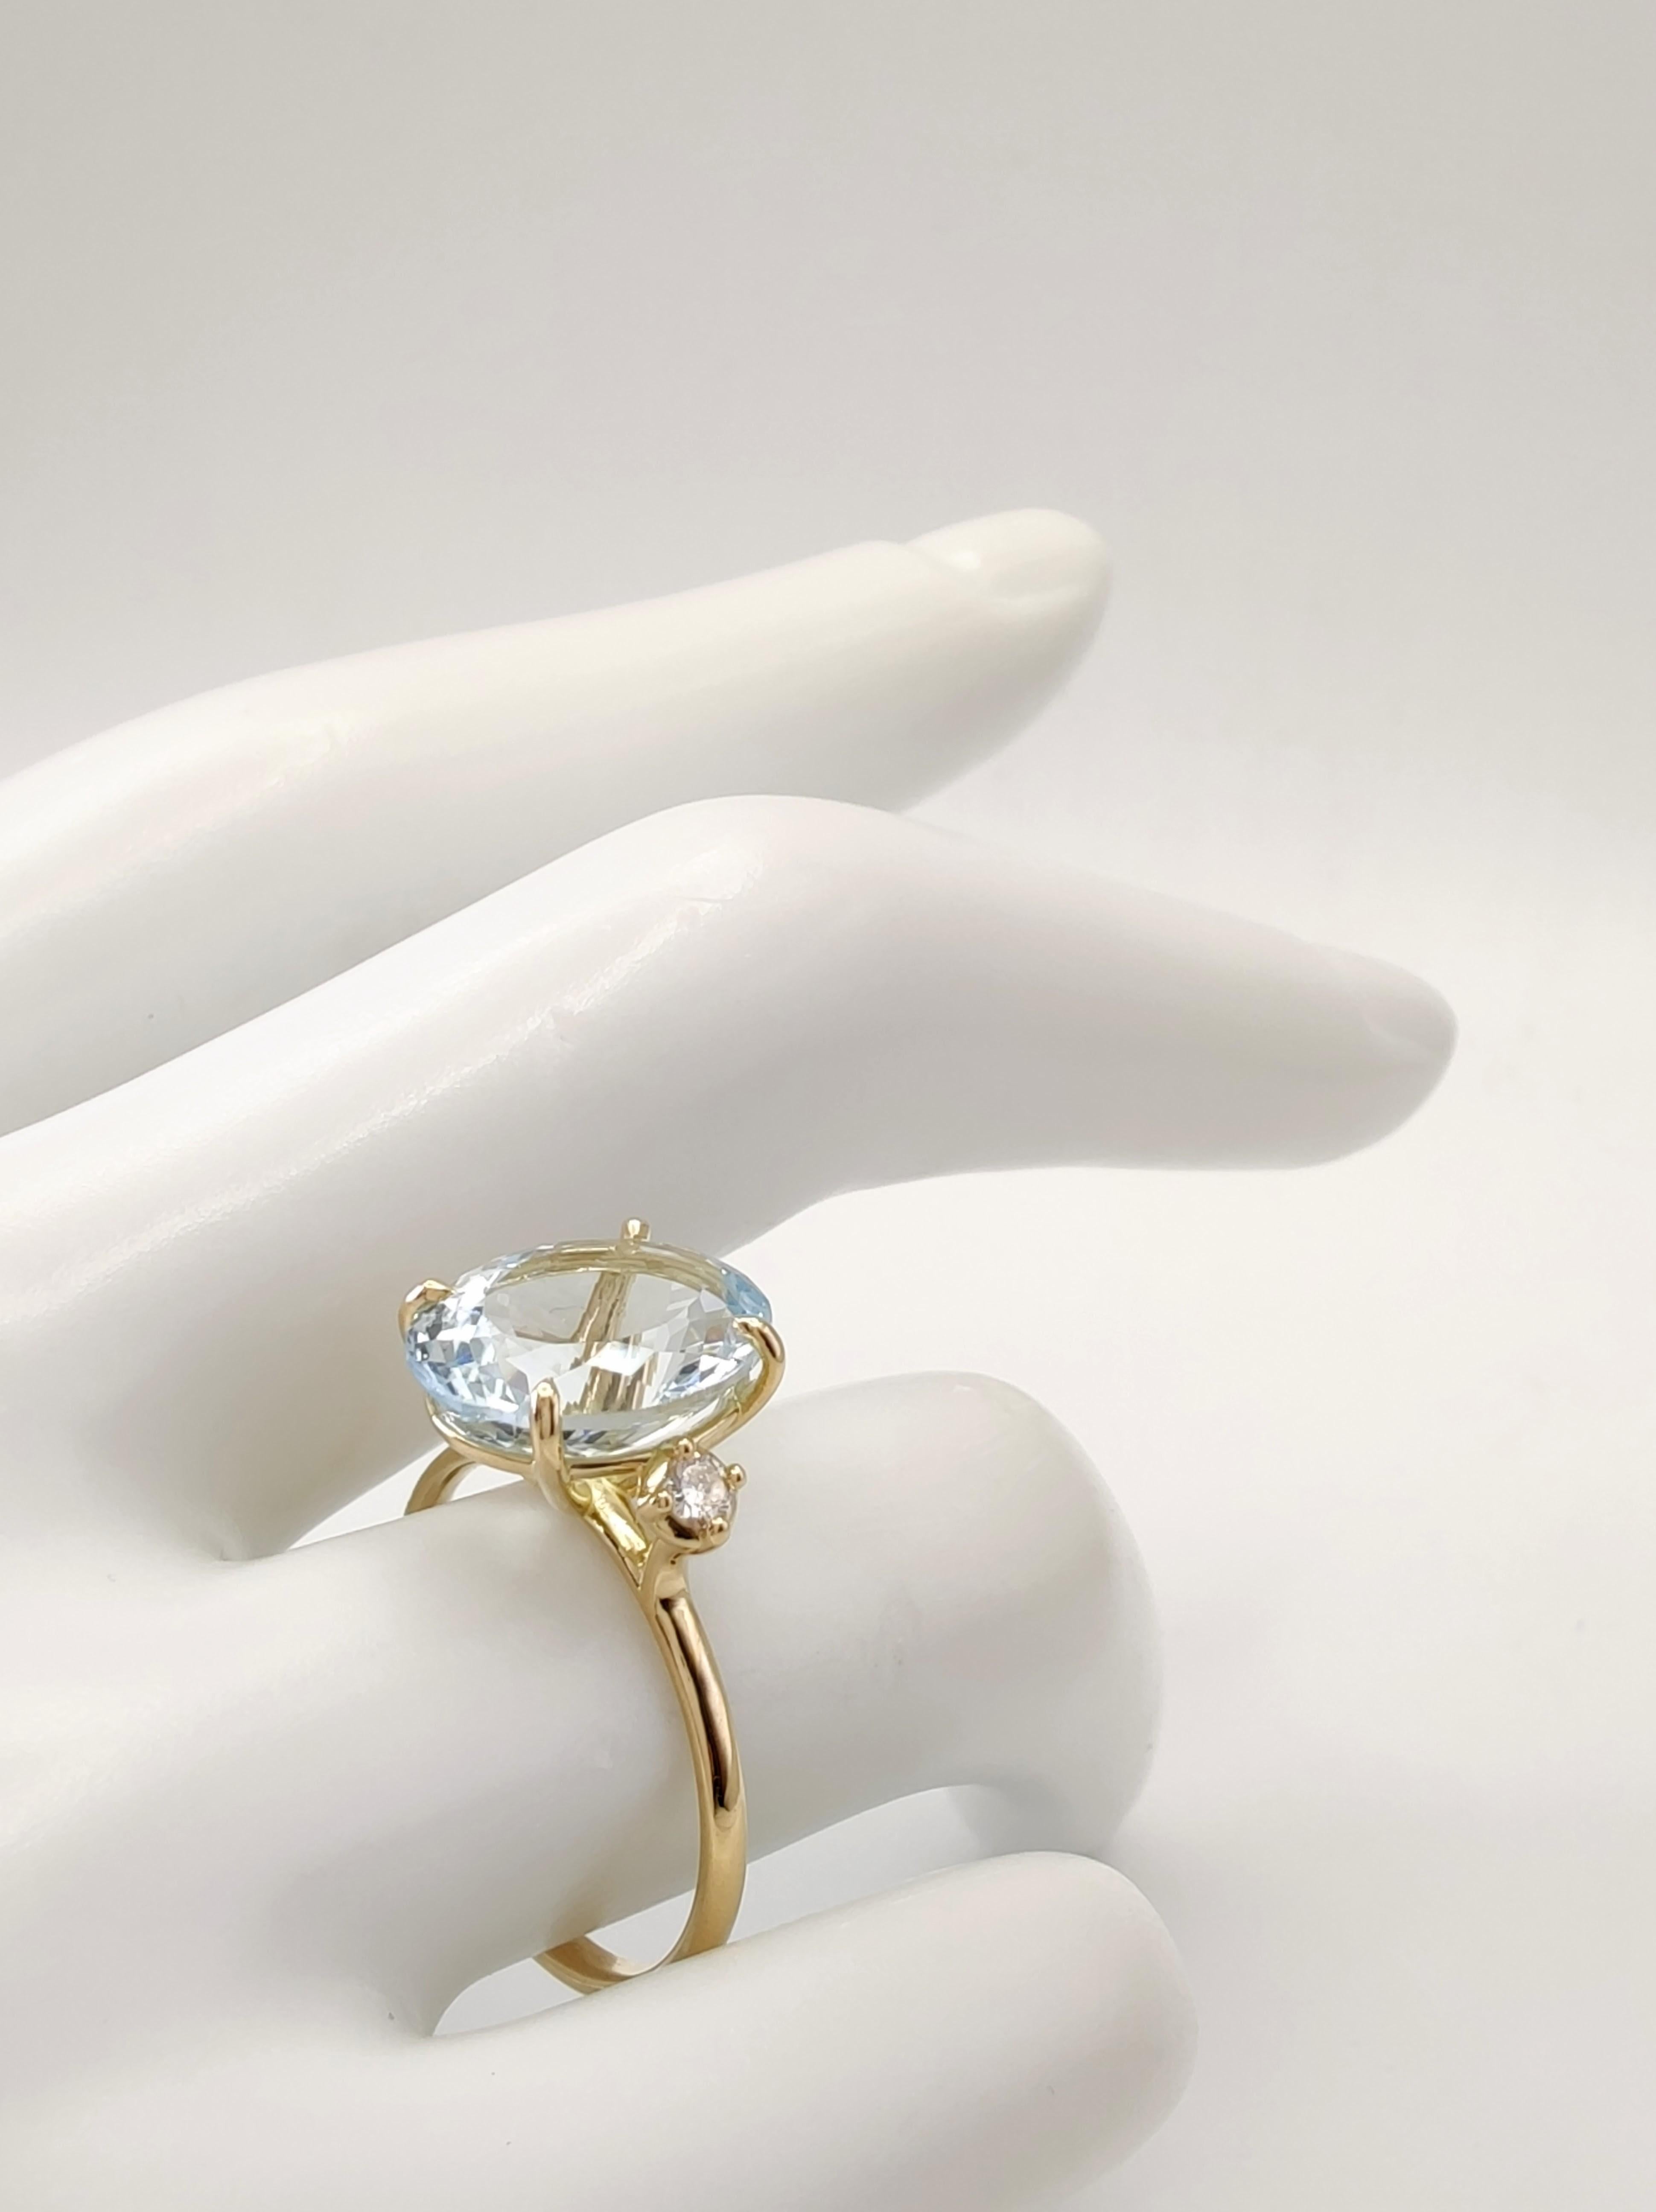 Contemporary 18K Gold Ring Aquamarine and Diamonds for weddings, engagements, proposals gifts